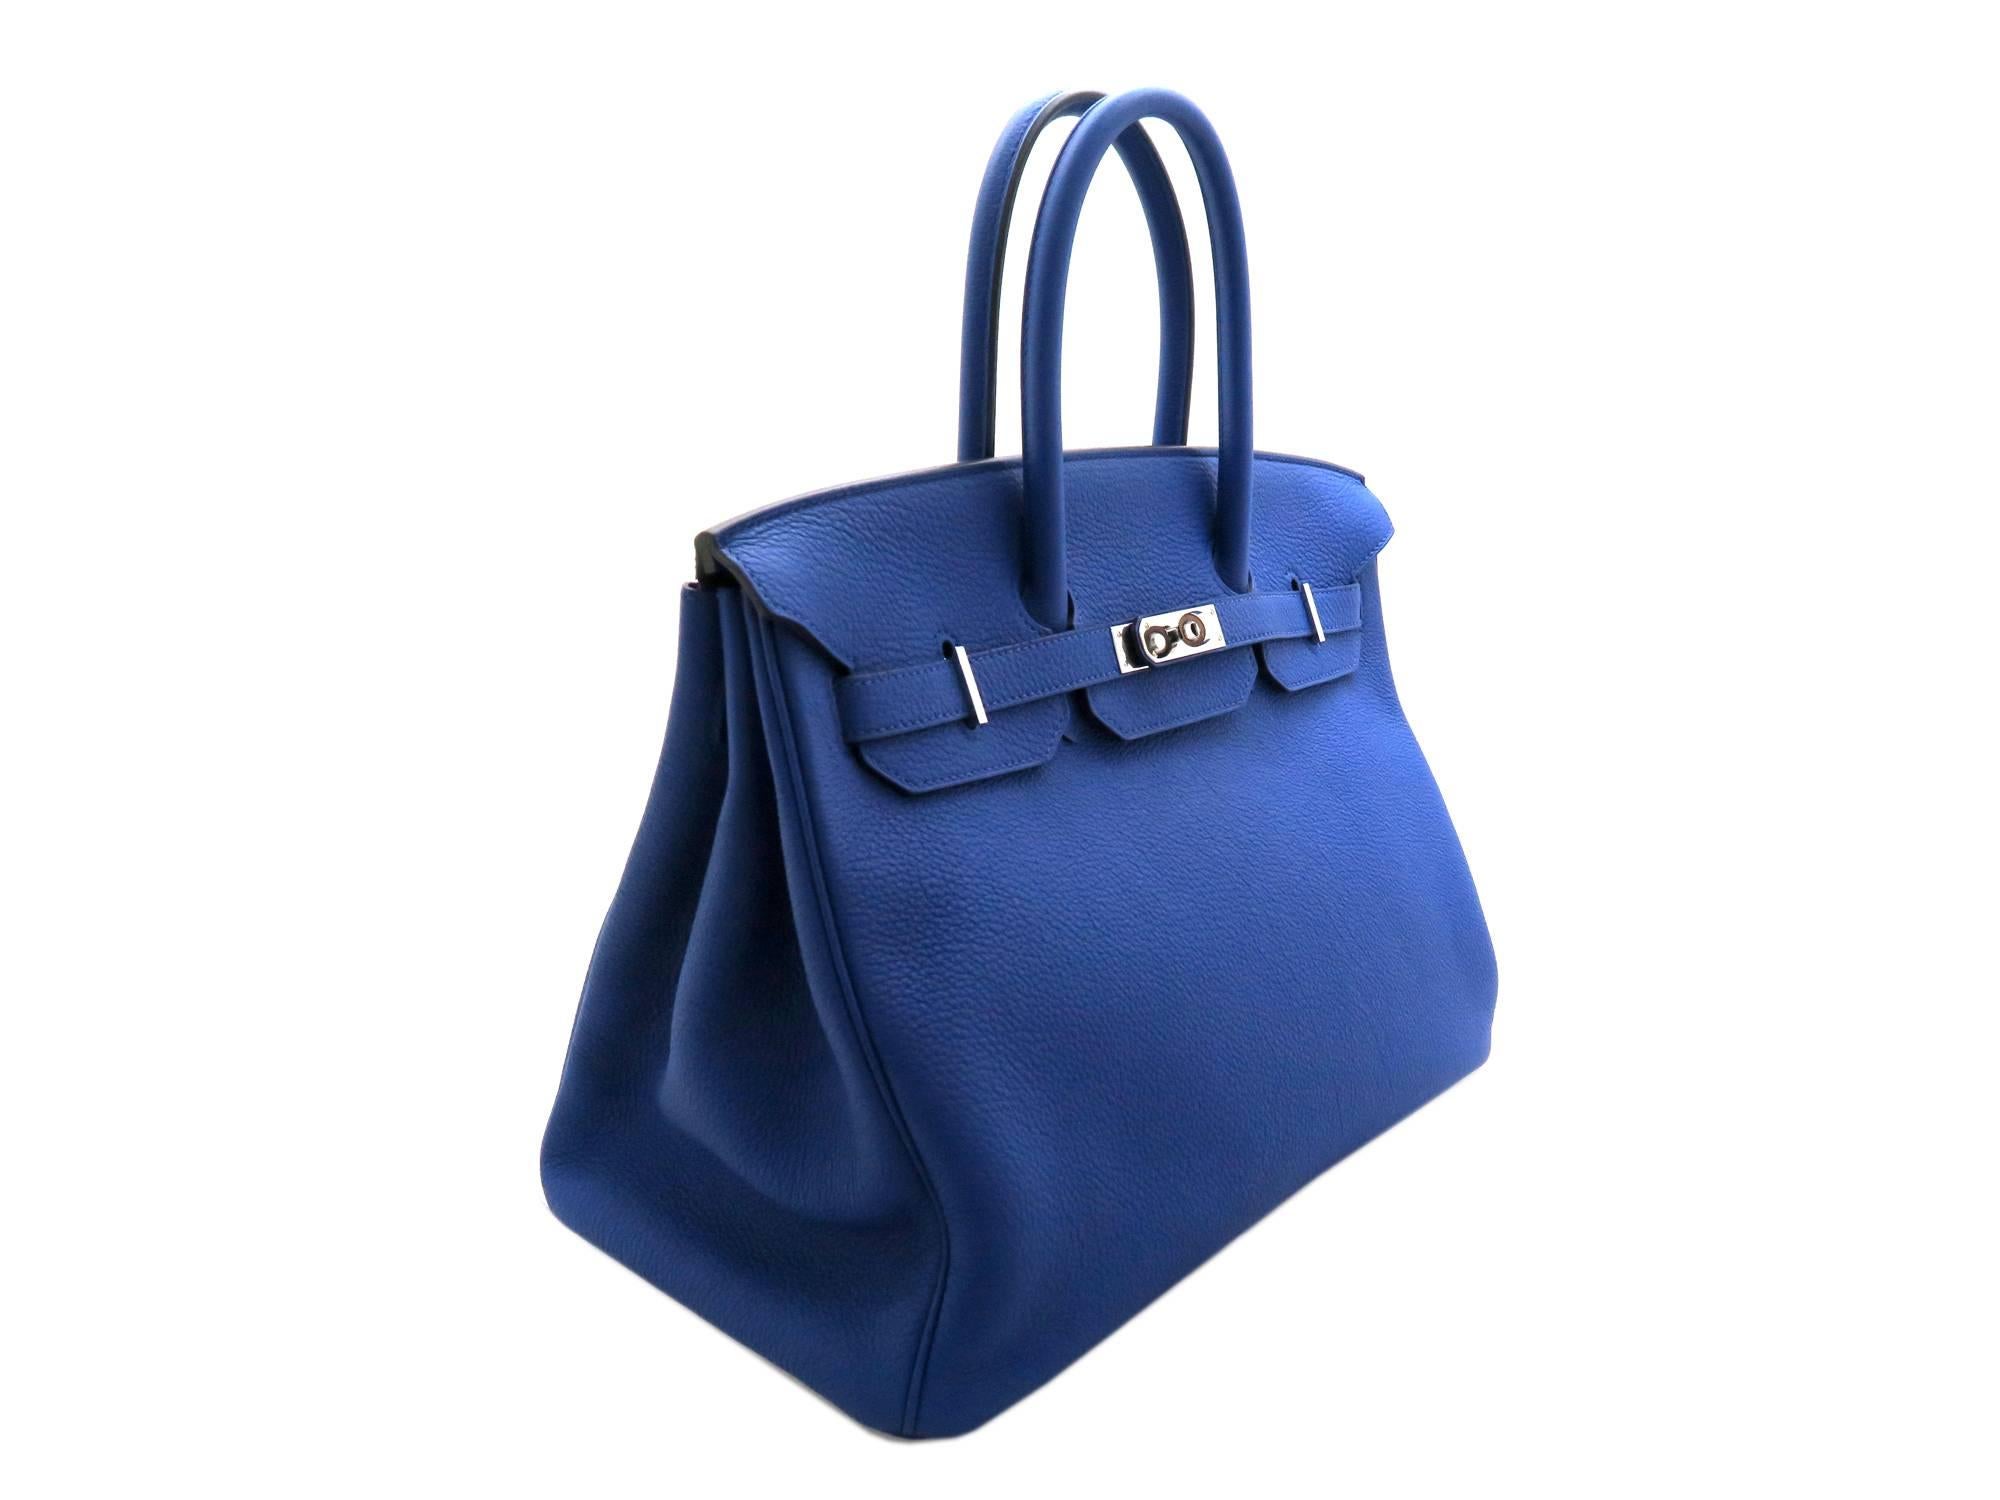 Color: Bleu Electric (designer color)
Material: Togo Leather

Condition:
Rank A
Overall: Good, few minor defects
Surface: Minor Stains
Corners:Minor Scratches
Edges:Good
Handles/Straps:Good
Hardware:Minor Scratches

Dimension:
W35 × H25 ×